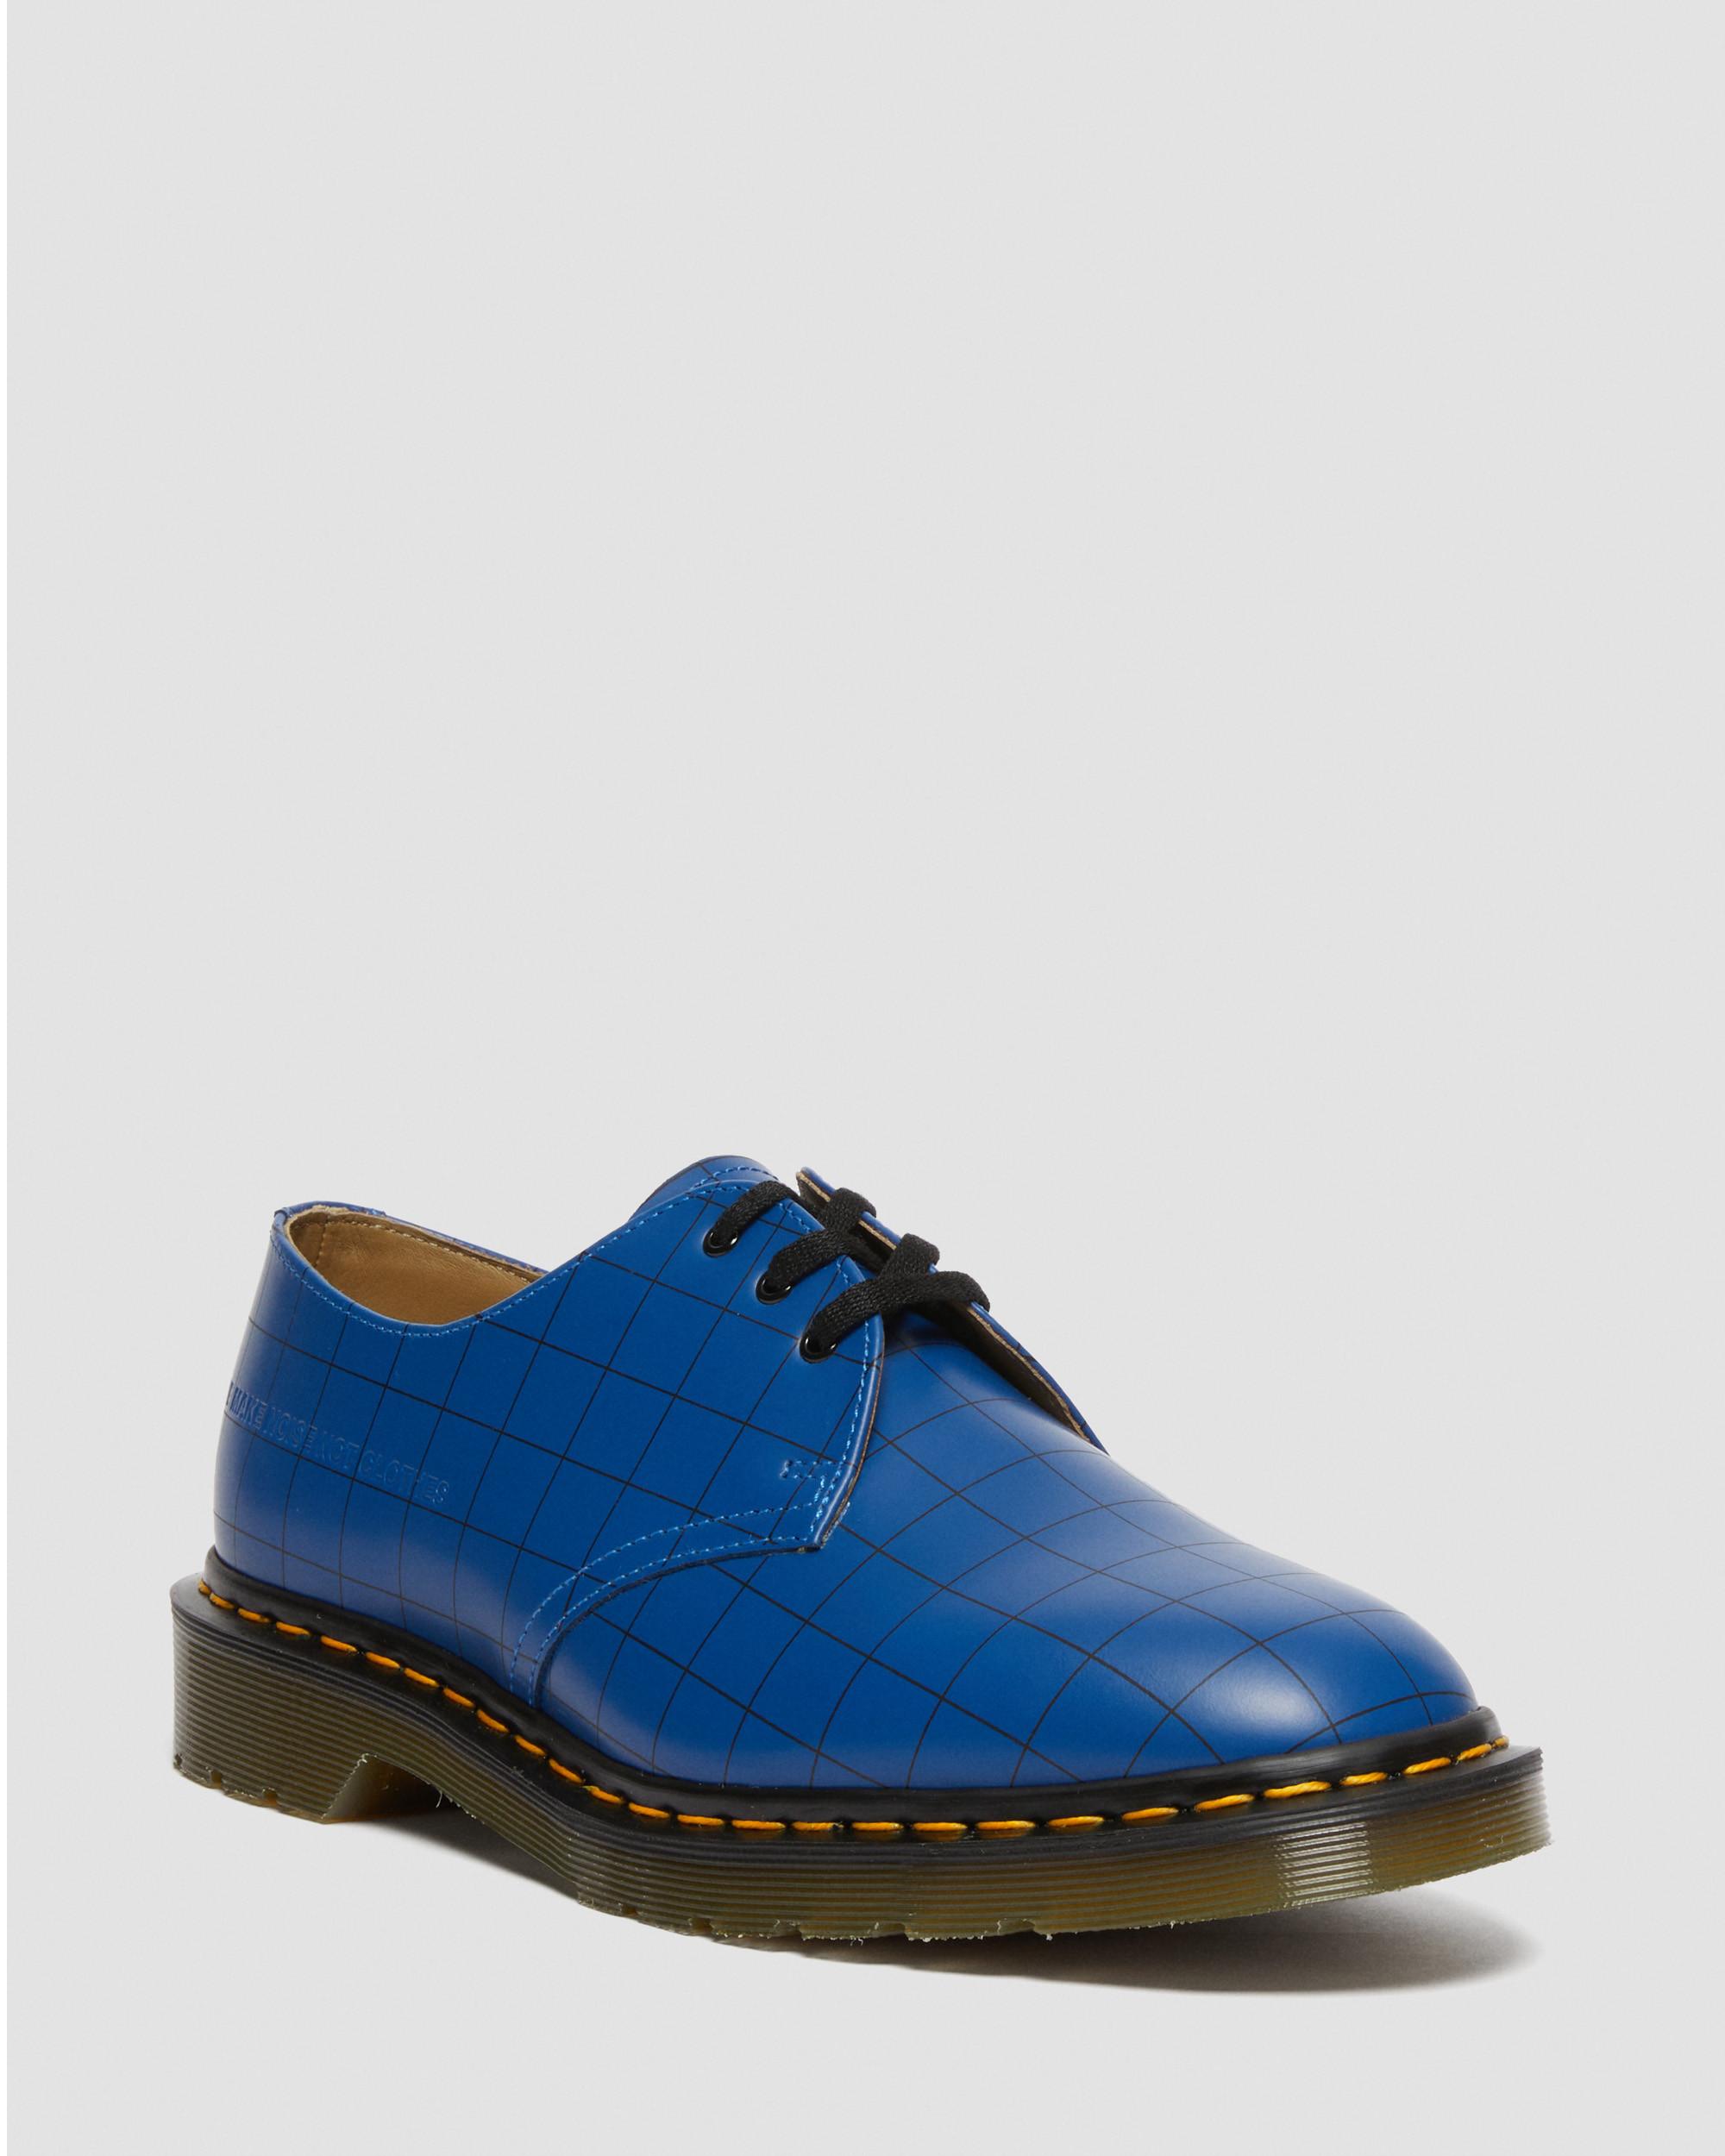 1461 Undercover Made in England Leather Oxford Shoes | Dr. Martens